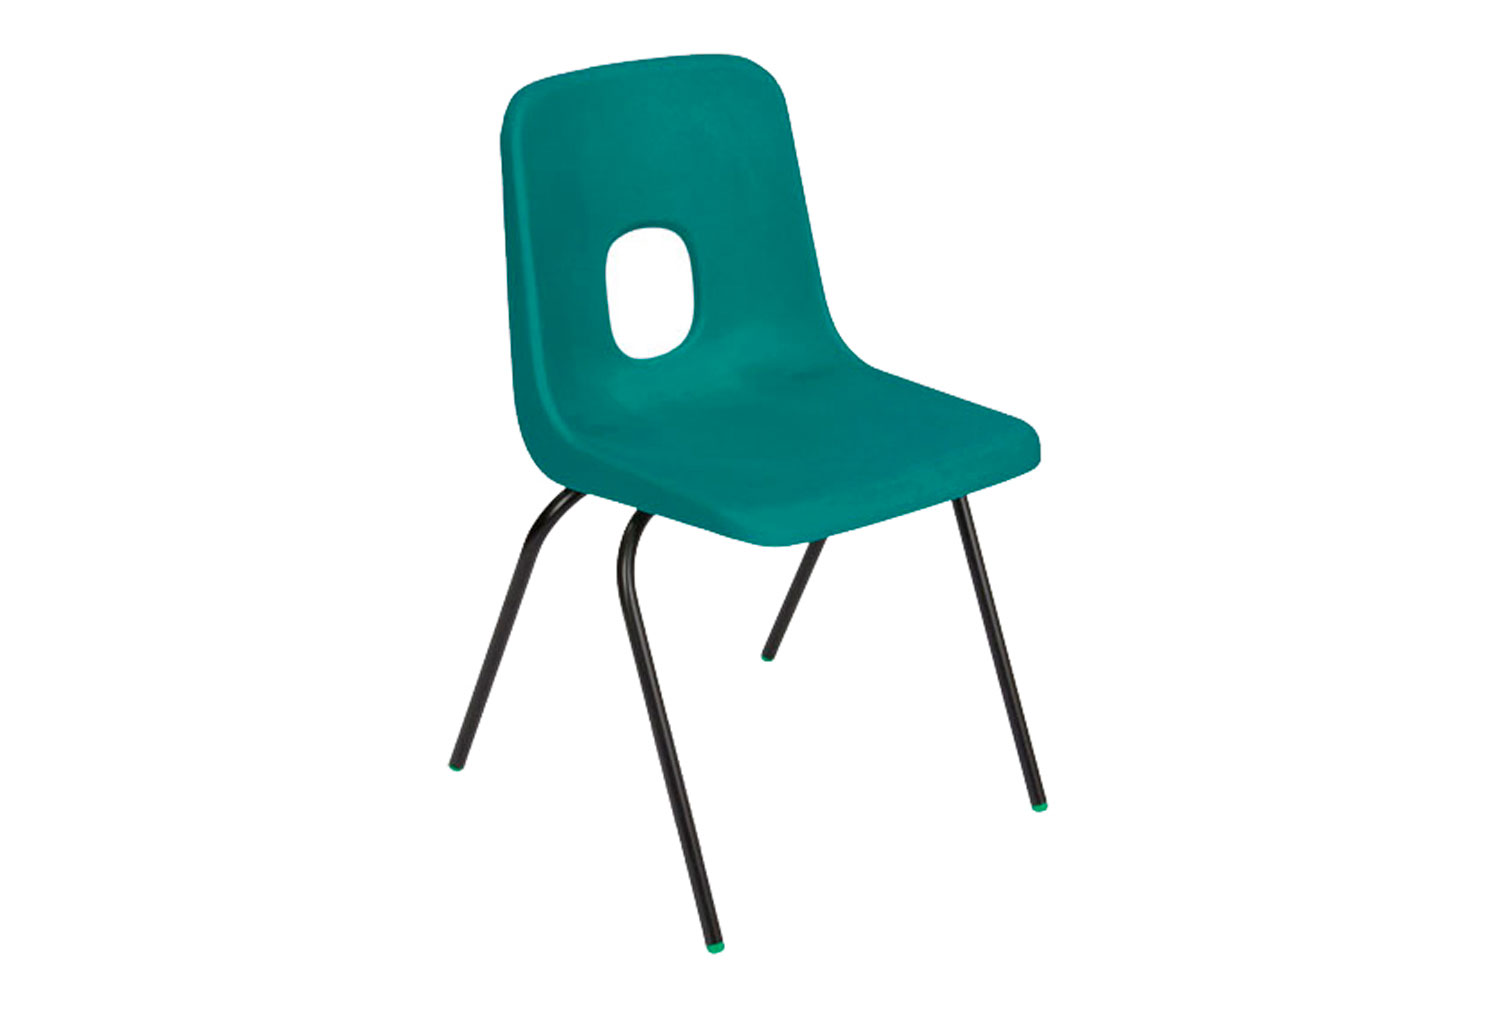 Qty 8 - Hille E Series Classroom Chair, 6-8 Years - 35wx31dx35h (cm), Grey Frame, Jade